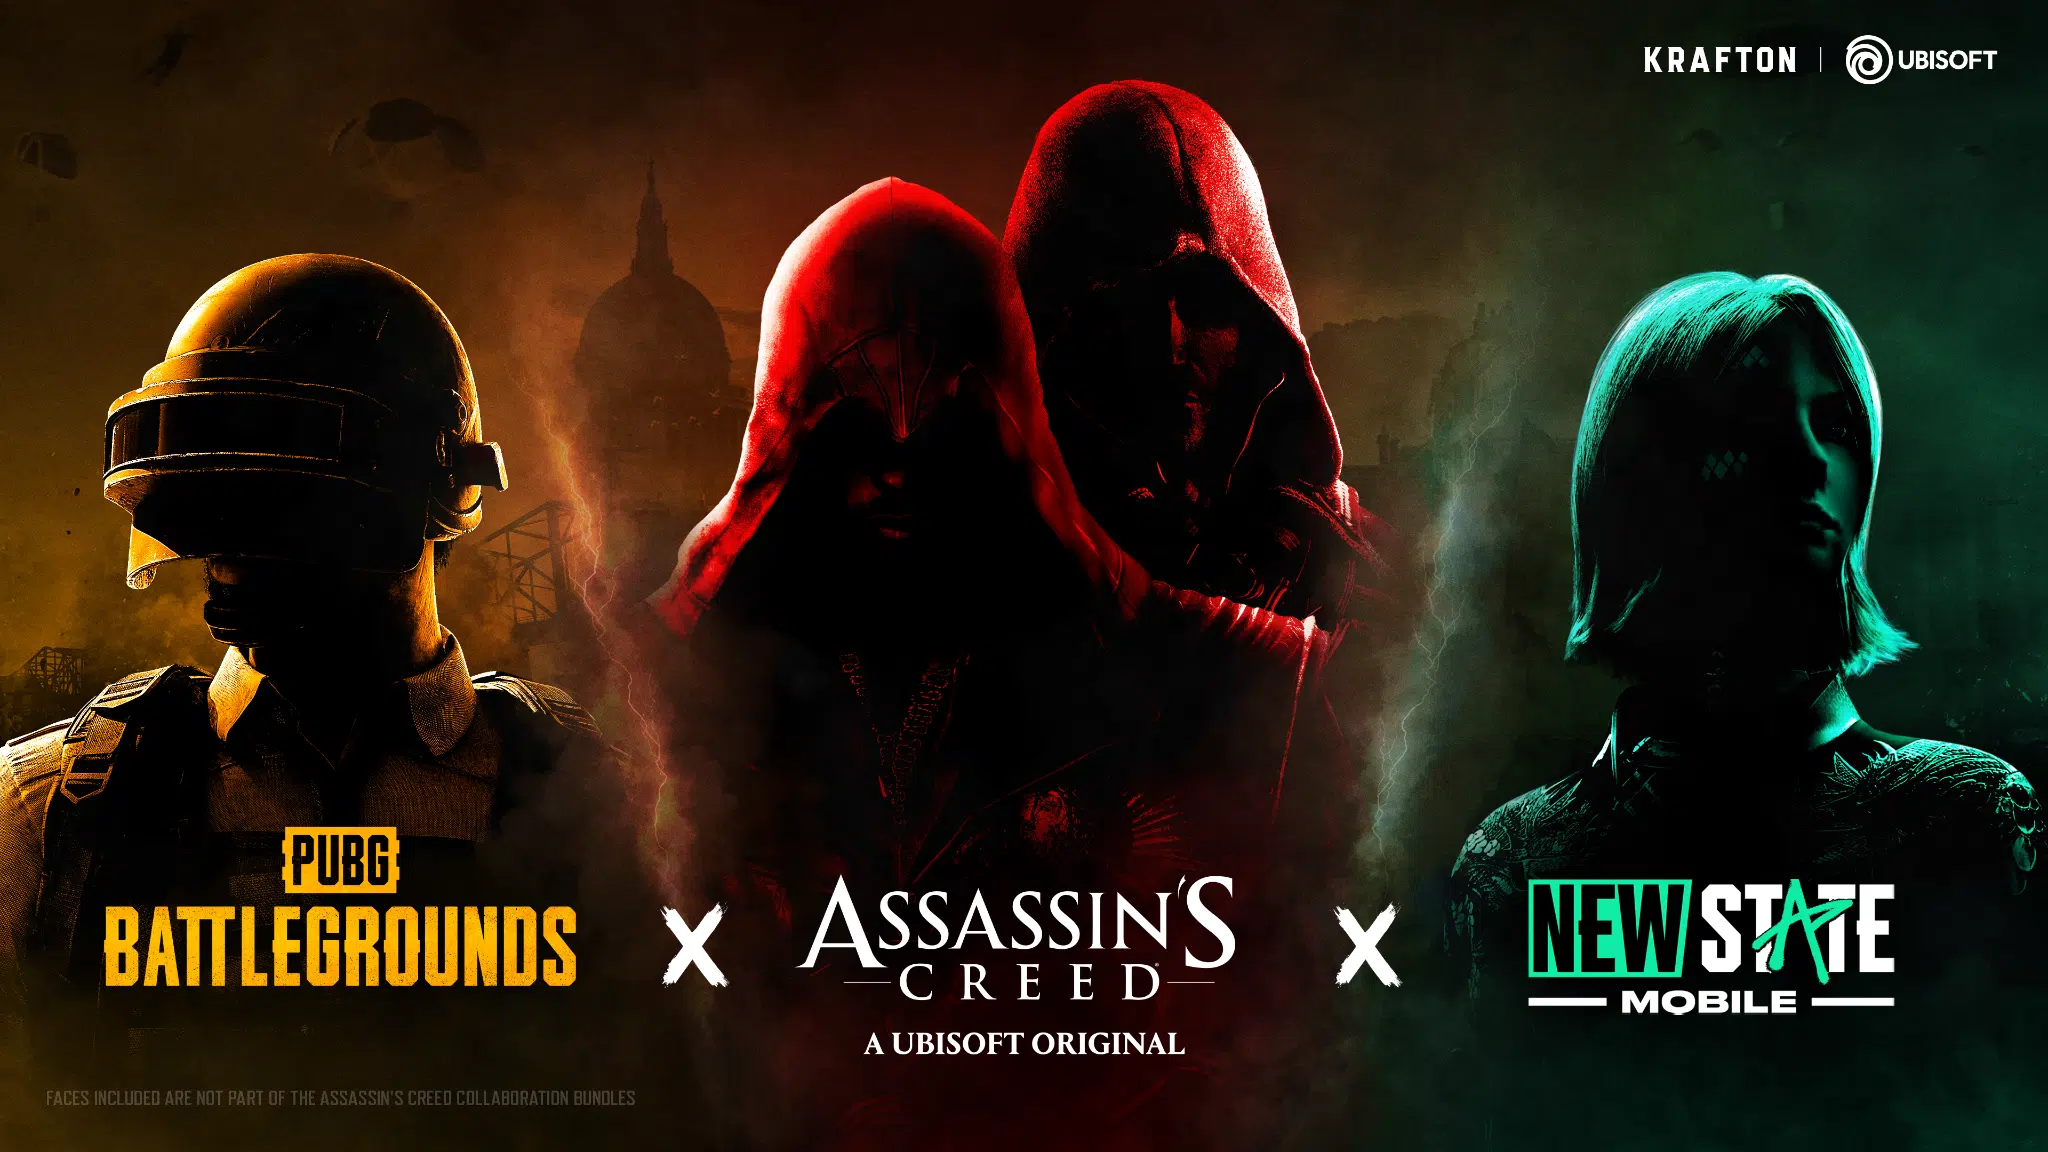 Assassin's Creed and PUBG event